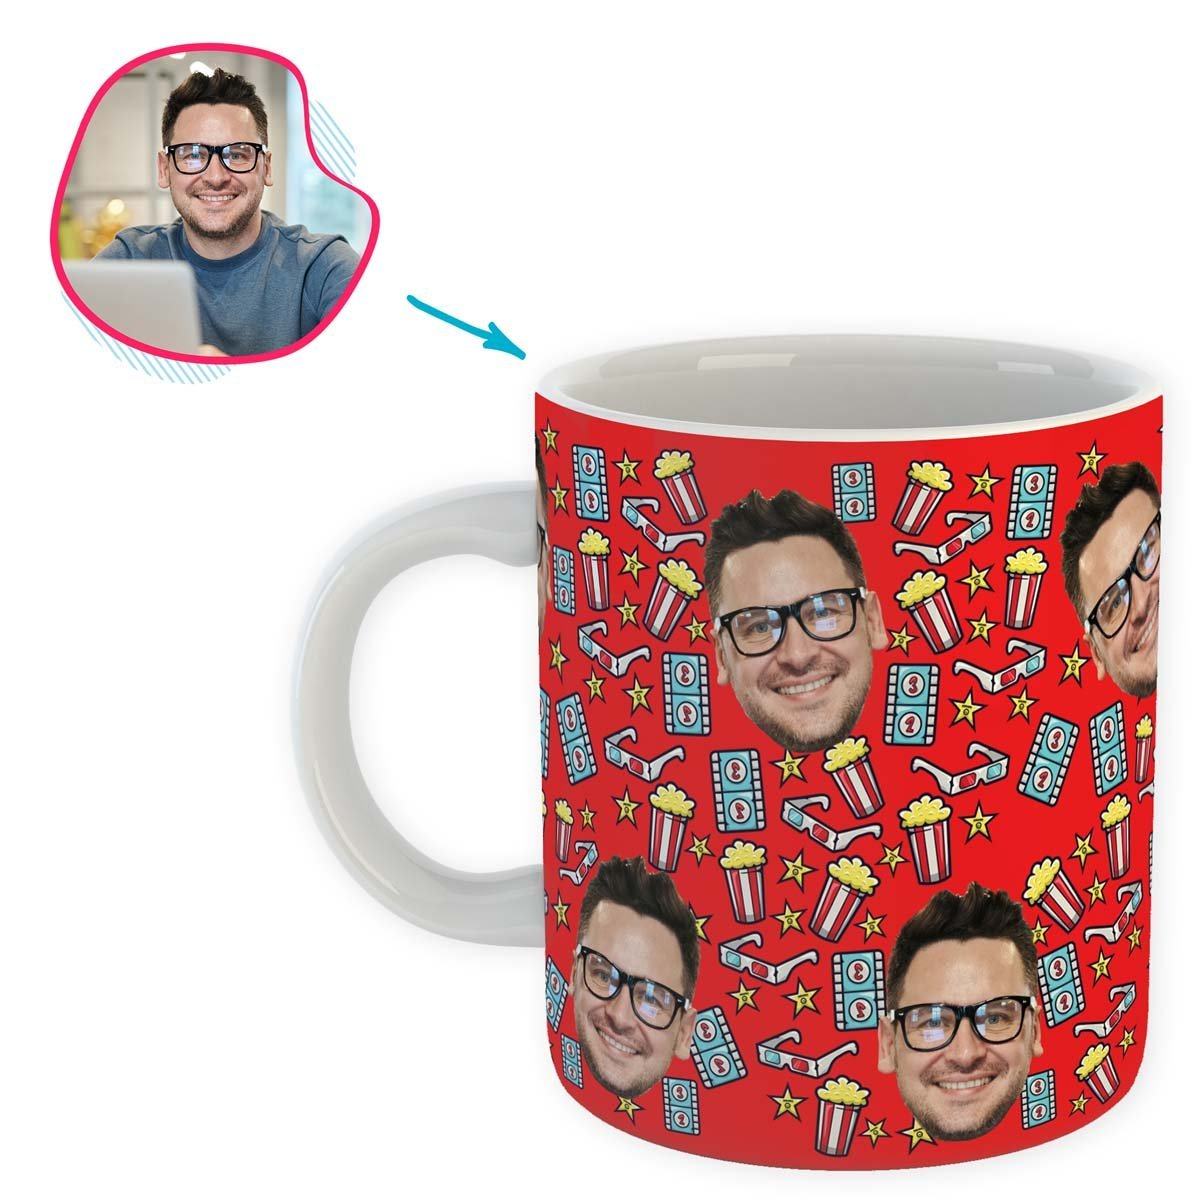 red Movie mug personalized with photo of face printed on it